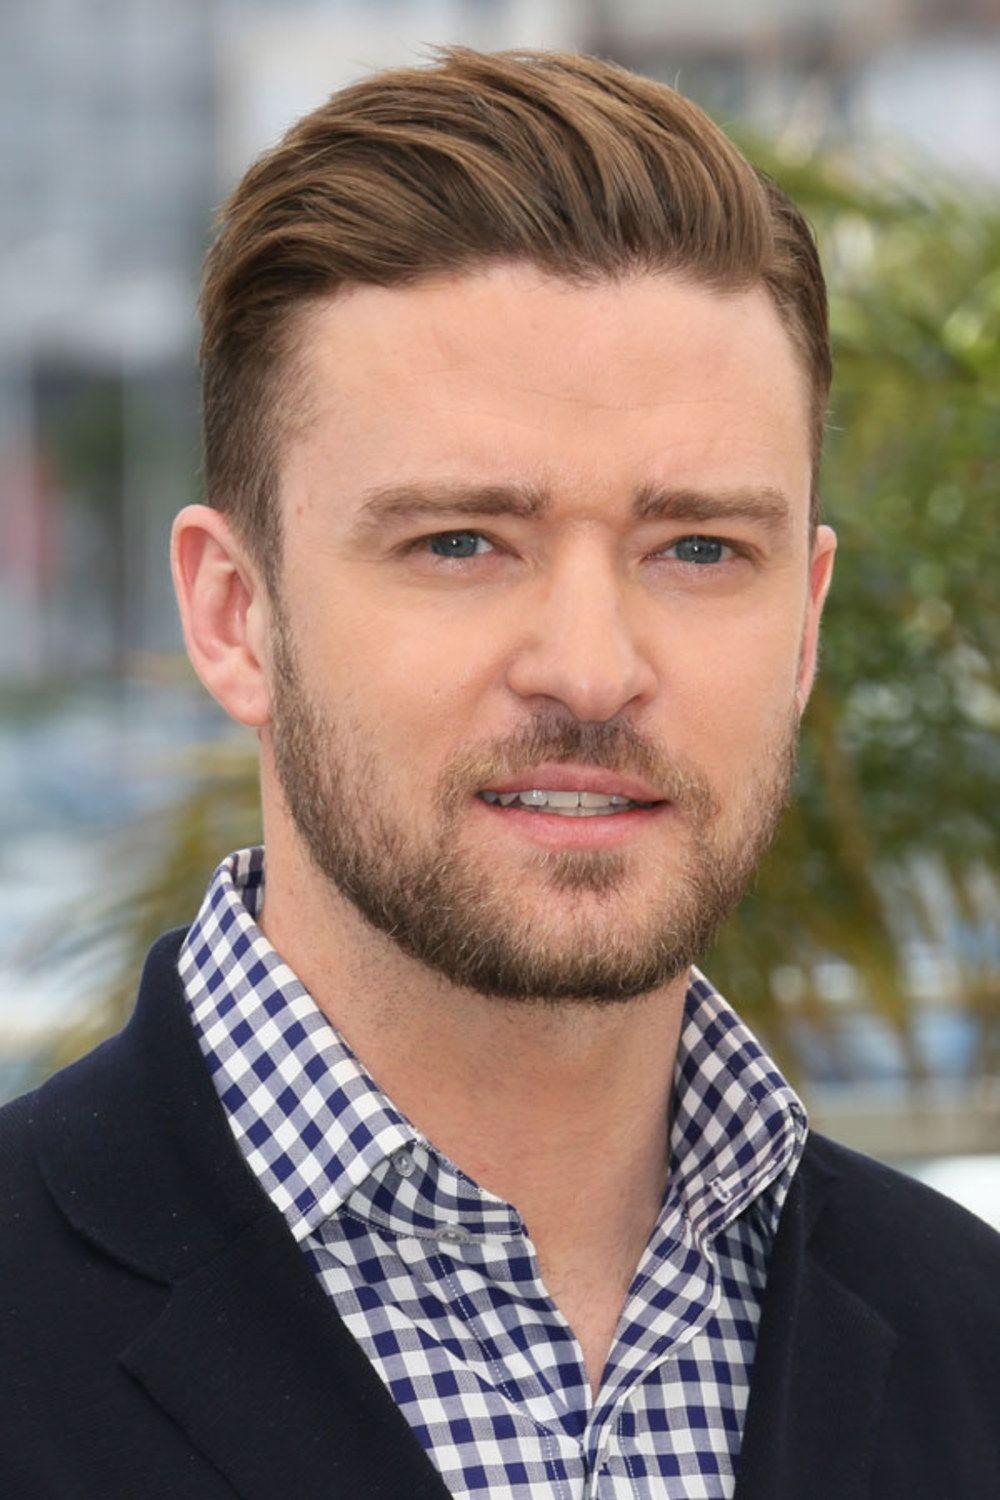 Justin Timberlake Wallpaper by Ron Walsey on FL. Celebrities HDQ